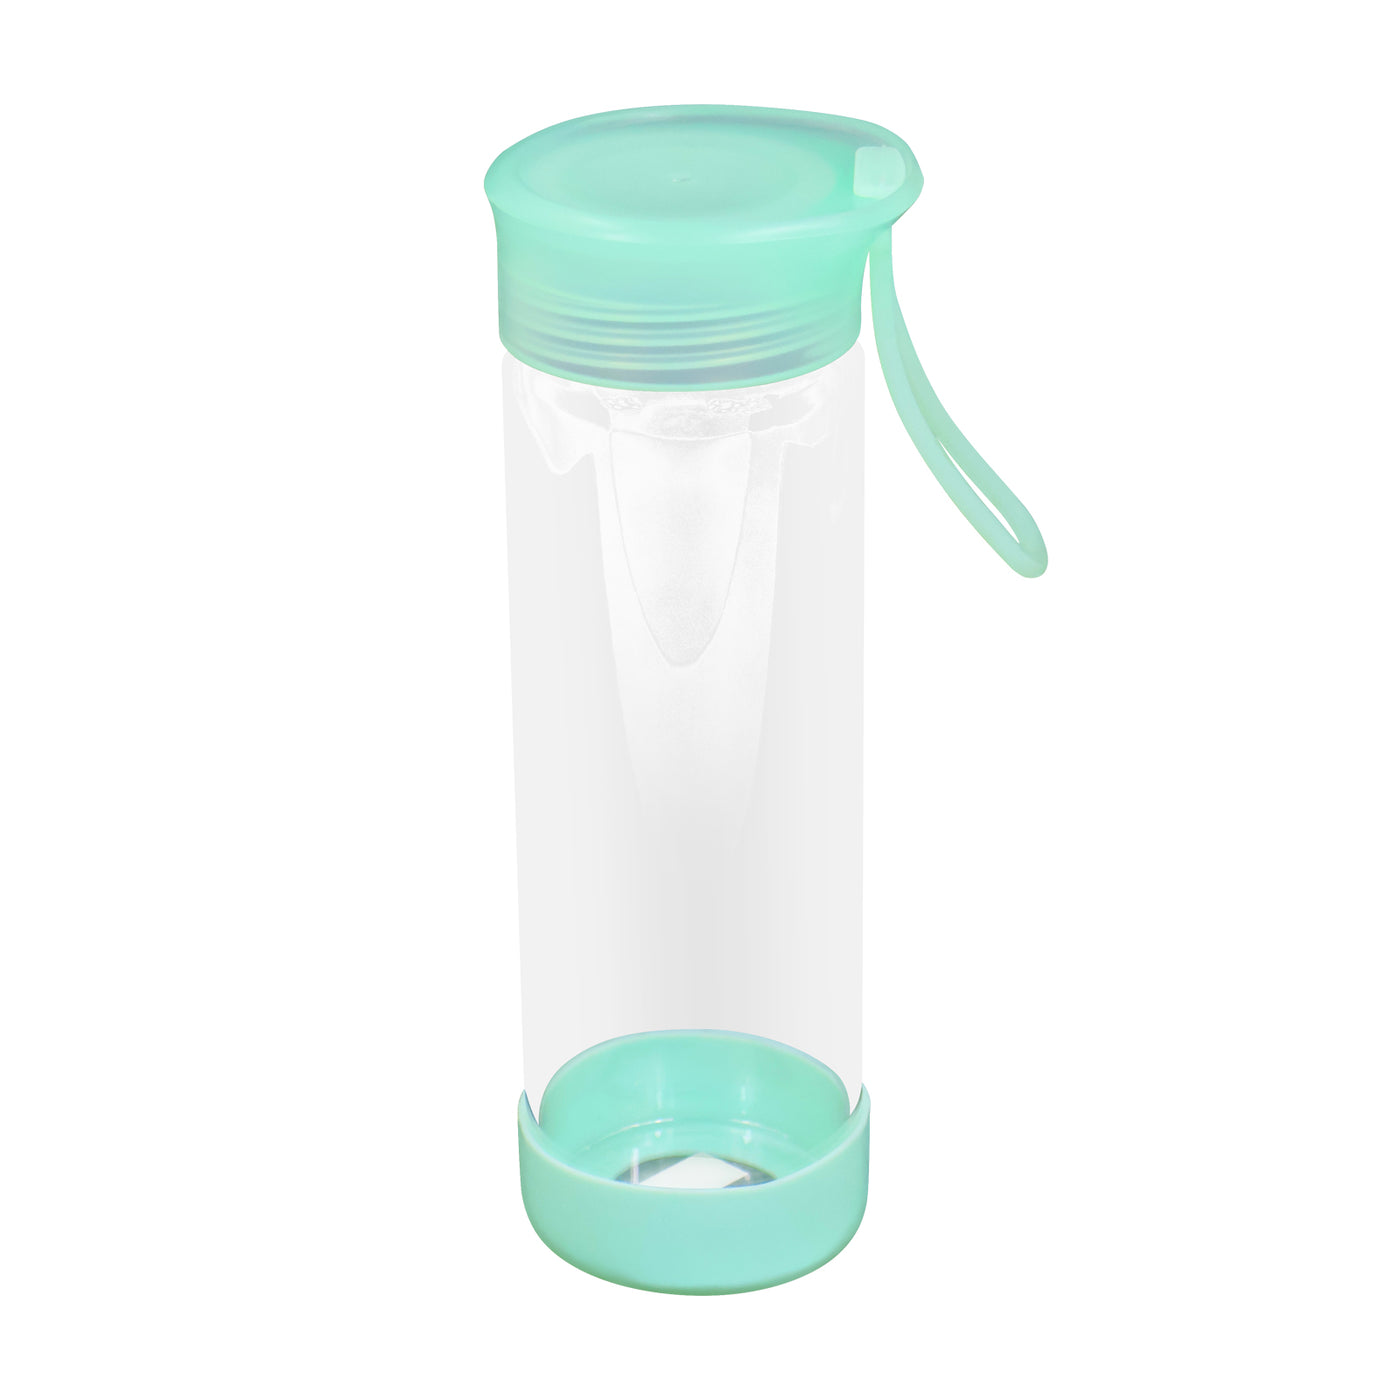 Clear Water Bottle 14oz / 410ml Wide Mouth Glass Bottles with Lids for Juicing